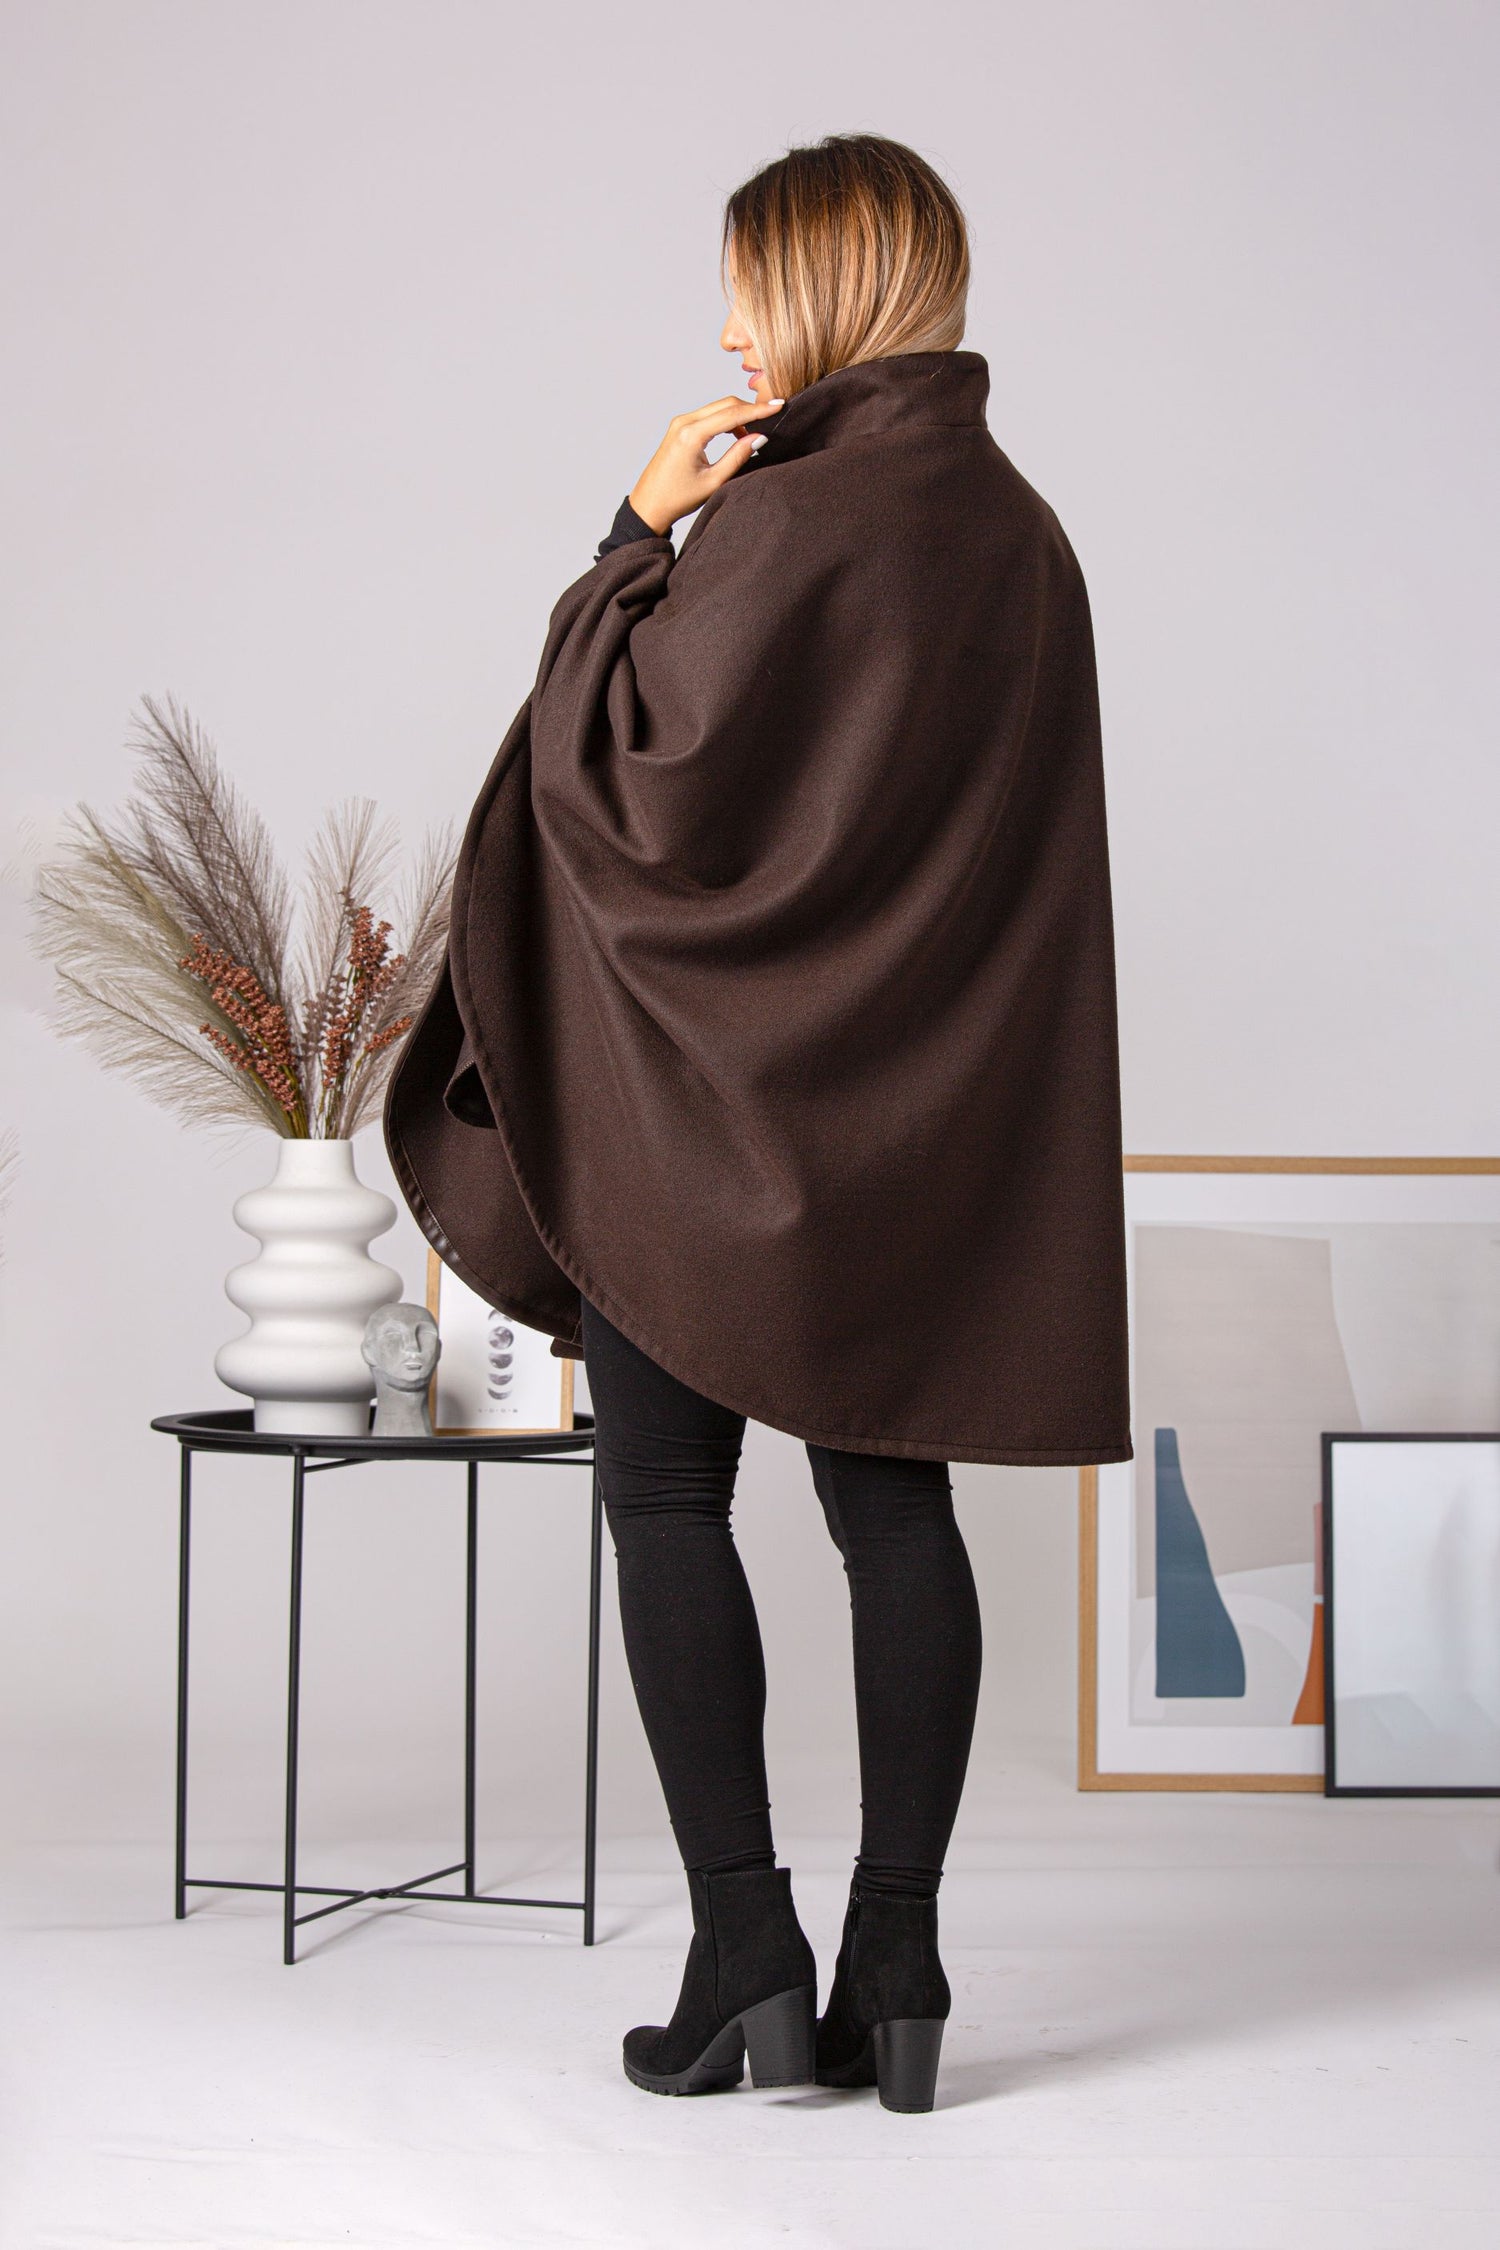 Effortless fashion and easy living with our Dark Navy Collared Cape Coat from NikkaPlace